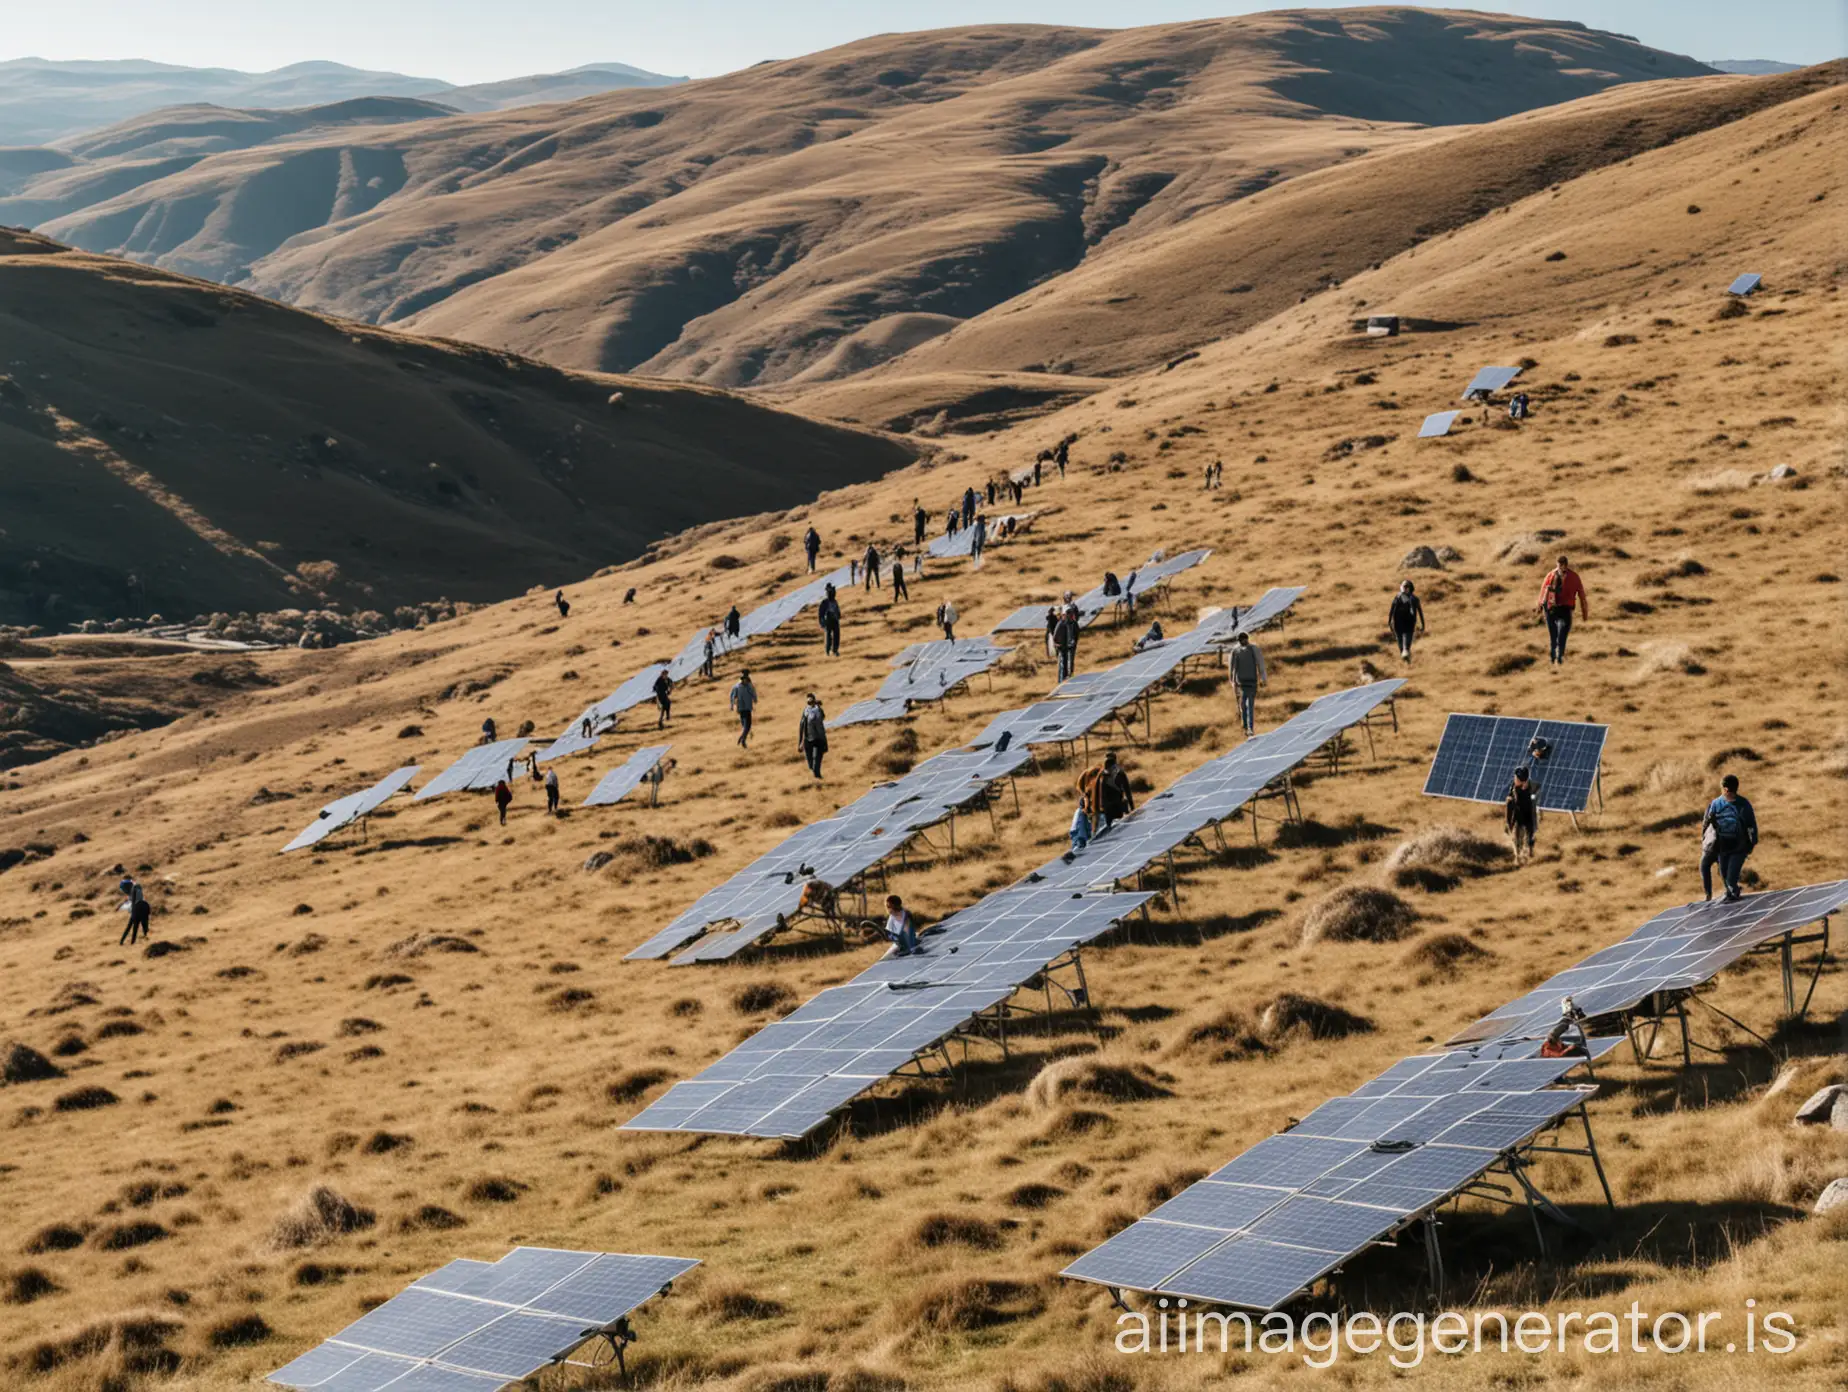 a group of people in the distance, walking around hills with a few solar panels scattered on them. The sky is very bright.